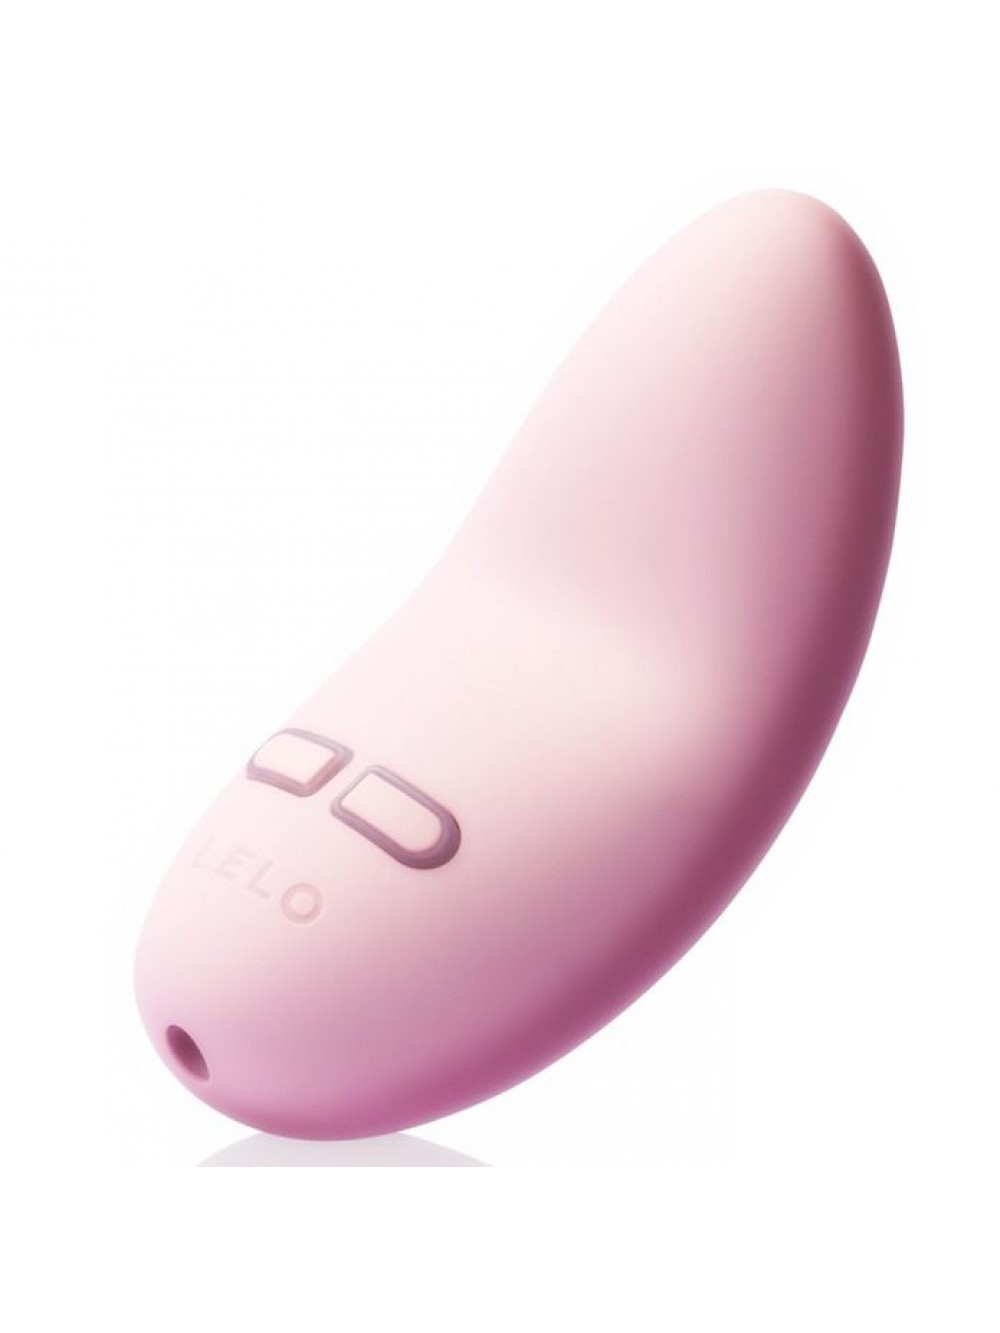 LELO LILY 2 PERSONAL MASSAGER PINK